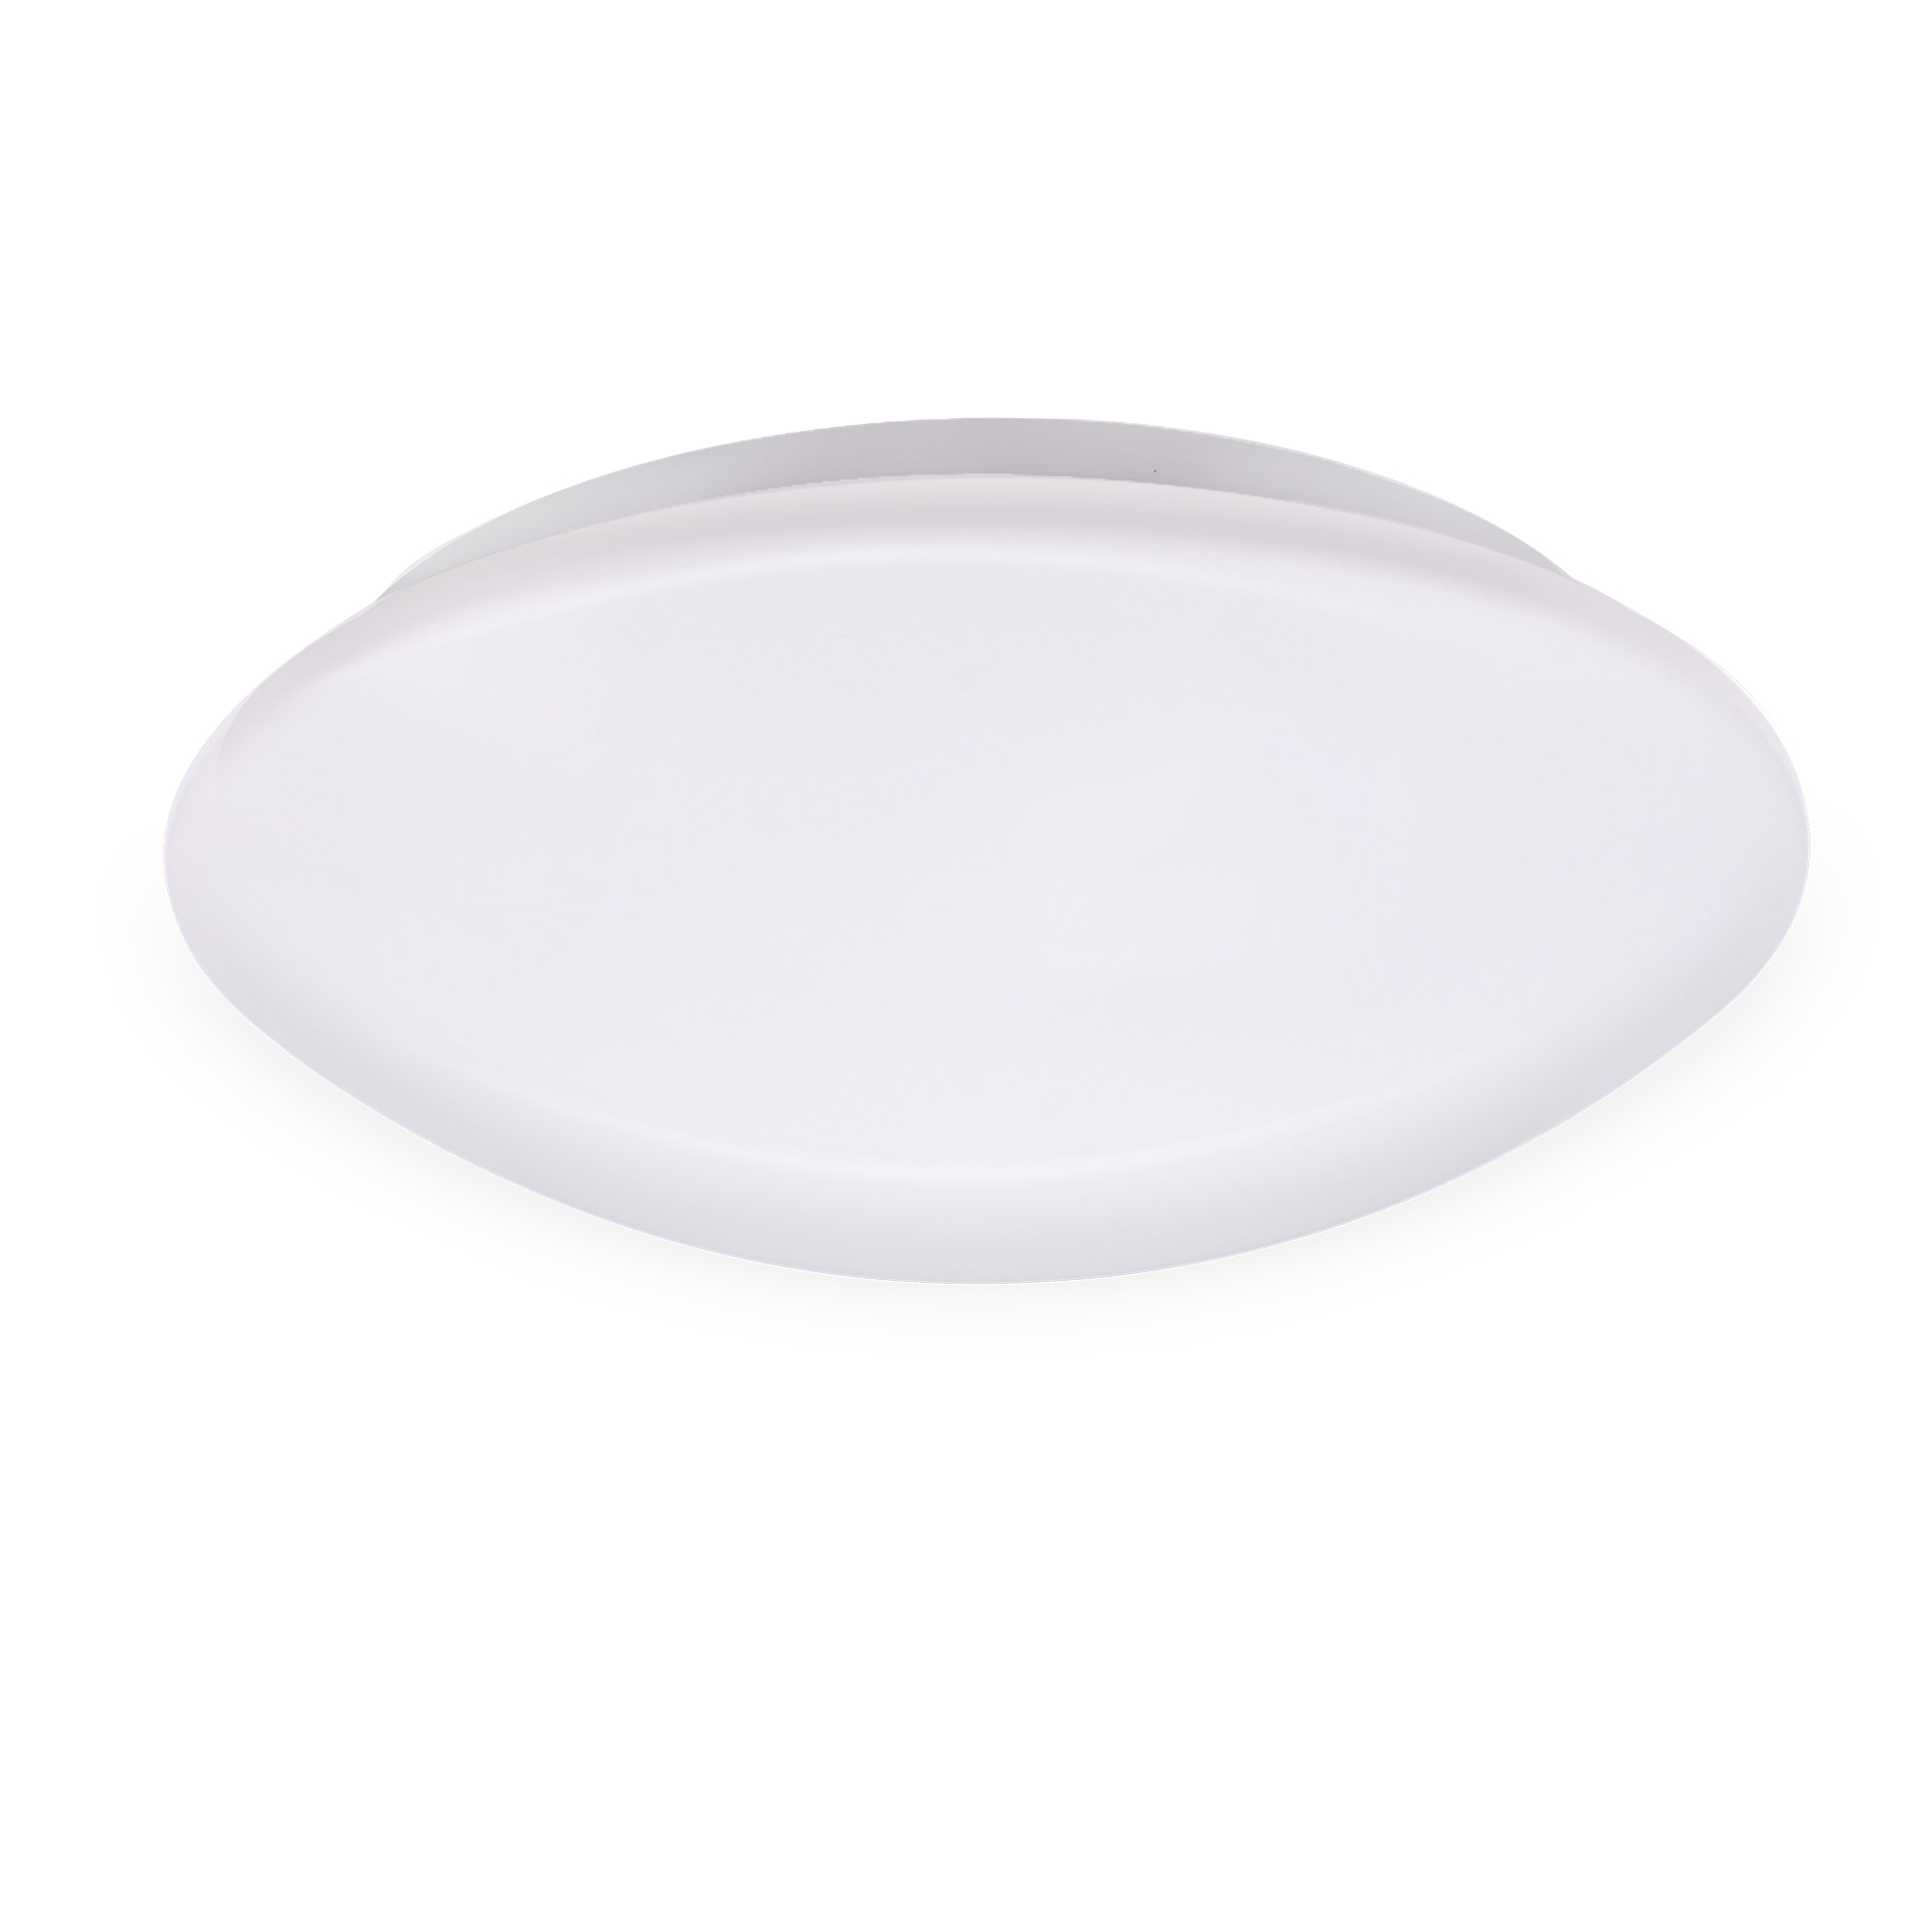 12-Inch Flush Mount LED Ceiling Light Fixture Dimmable 120V Daylight Glow 